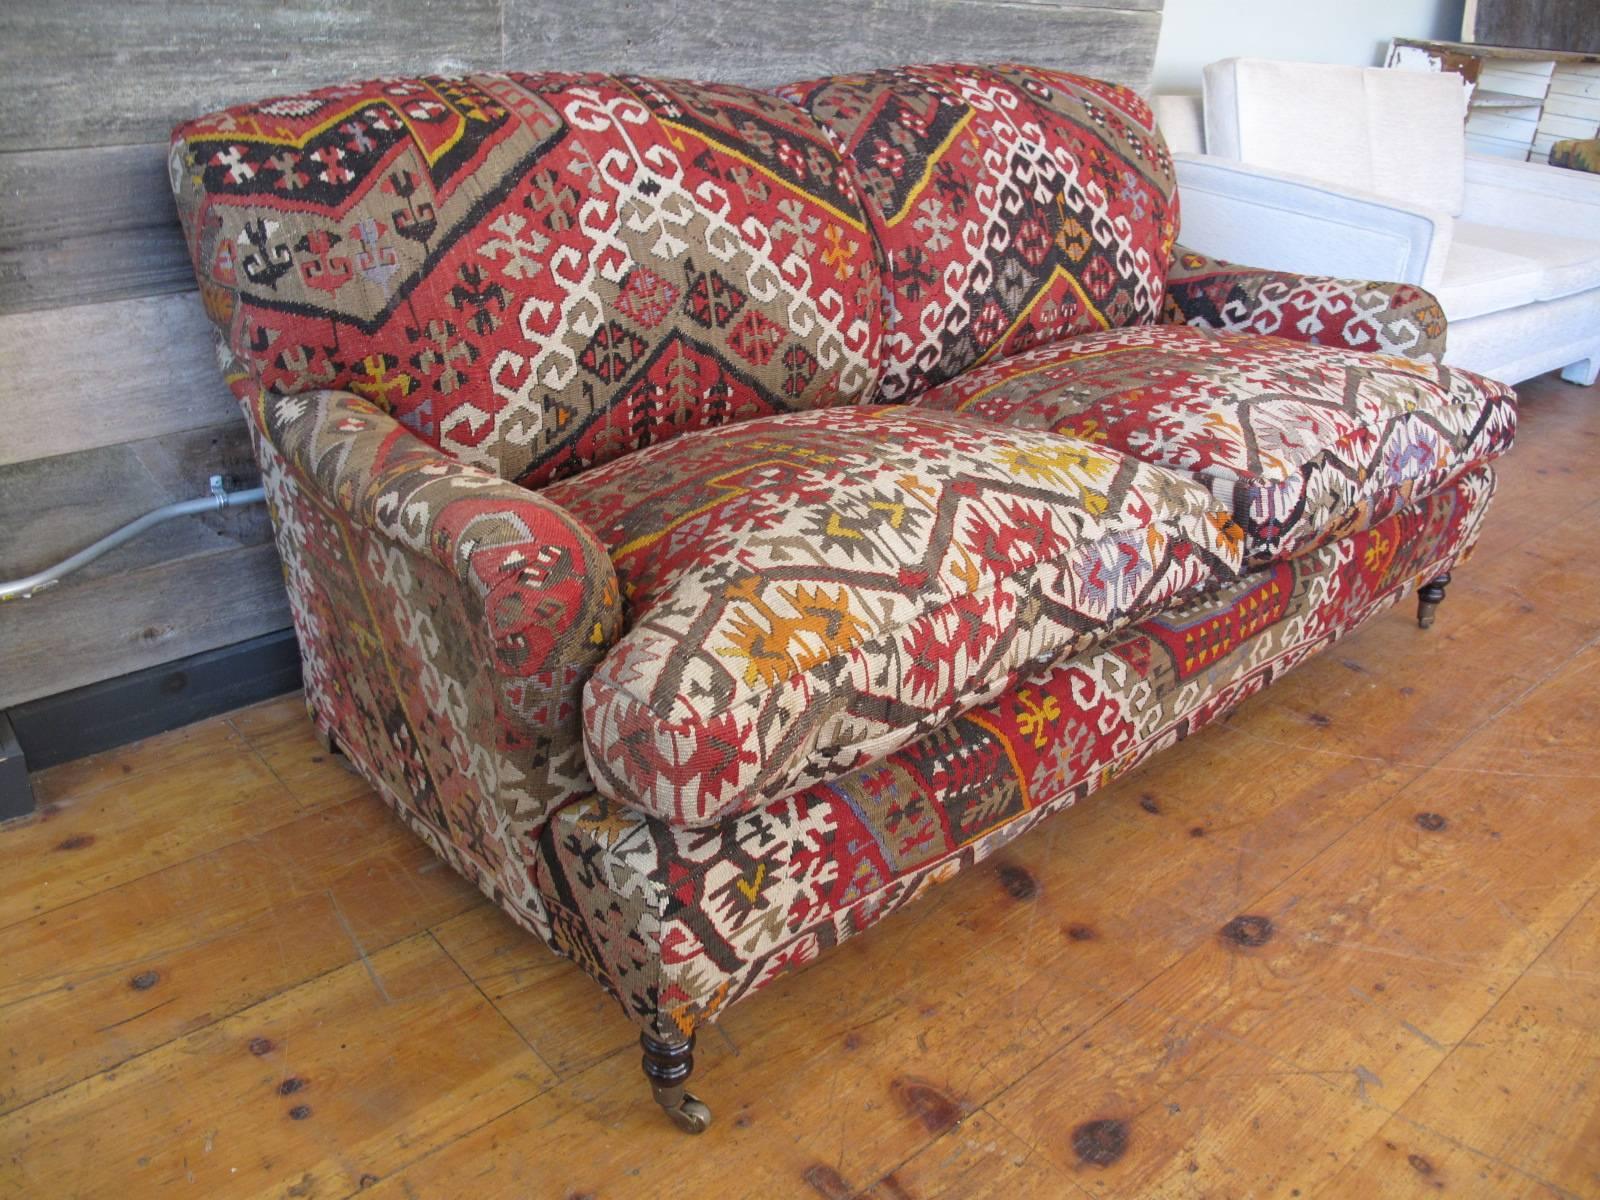 Standard George Smith roll arm sofa in vibrant flat-weave Kilim. Down cushions. Caster feet. Superb construction. Made in England.